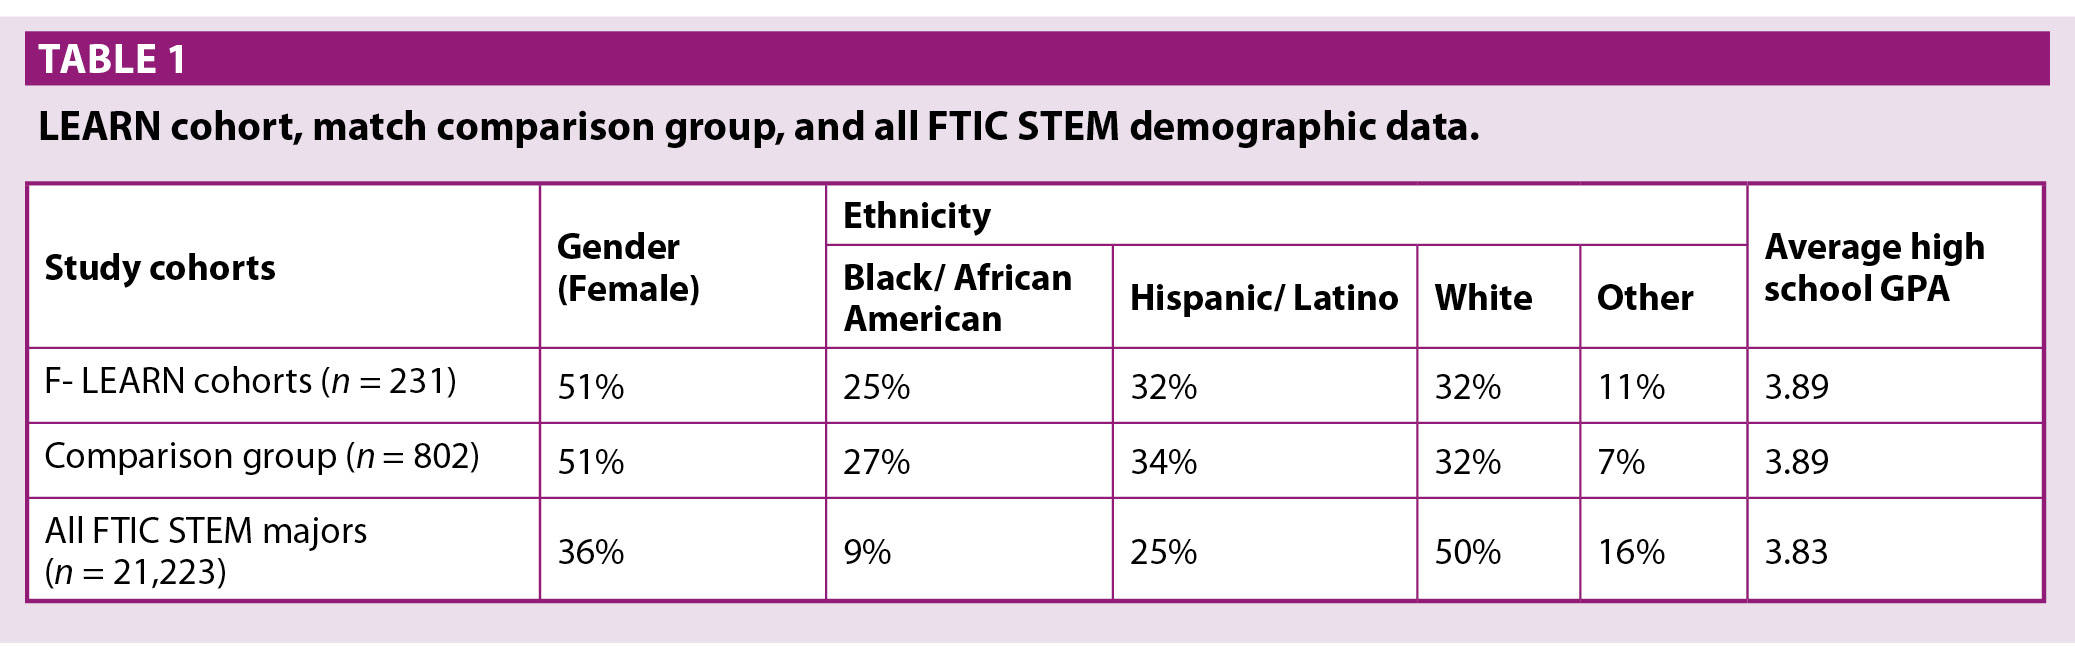 LEARN cohort, match comparison group, and all FTIC STEM demographic data. 